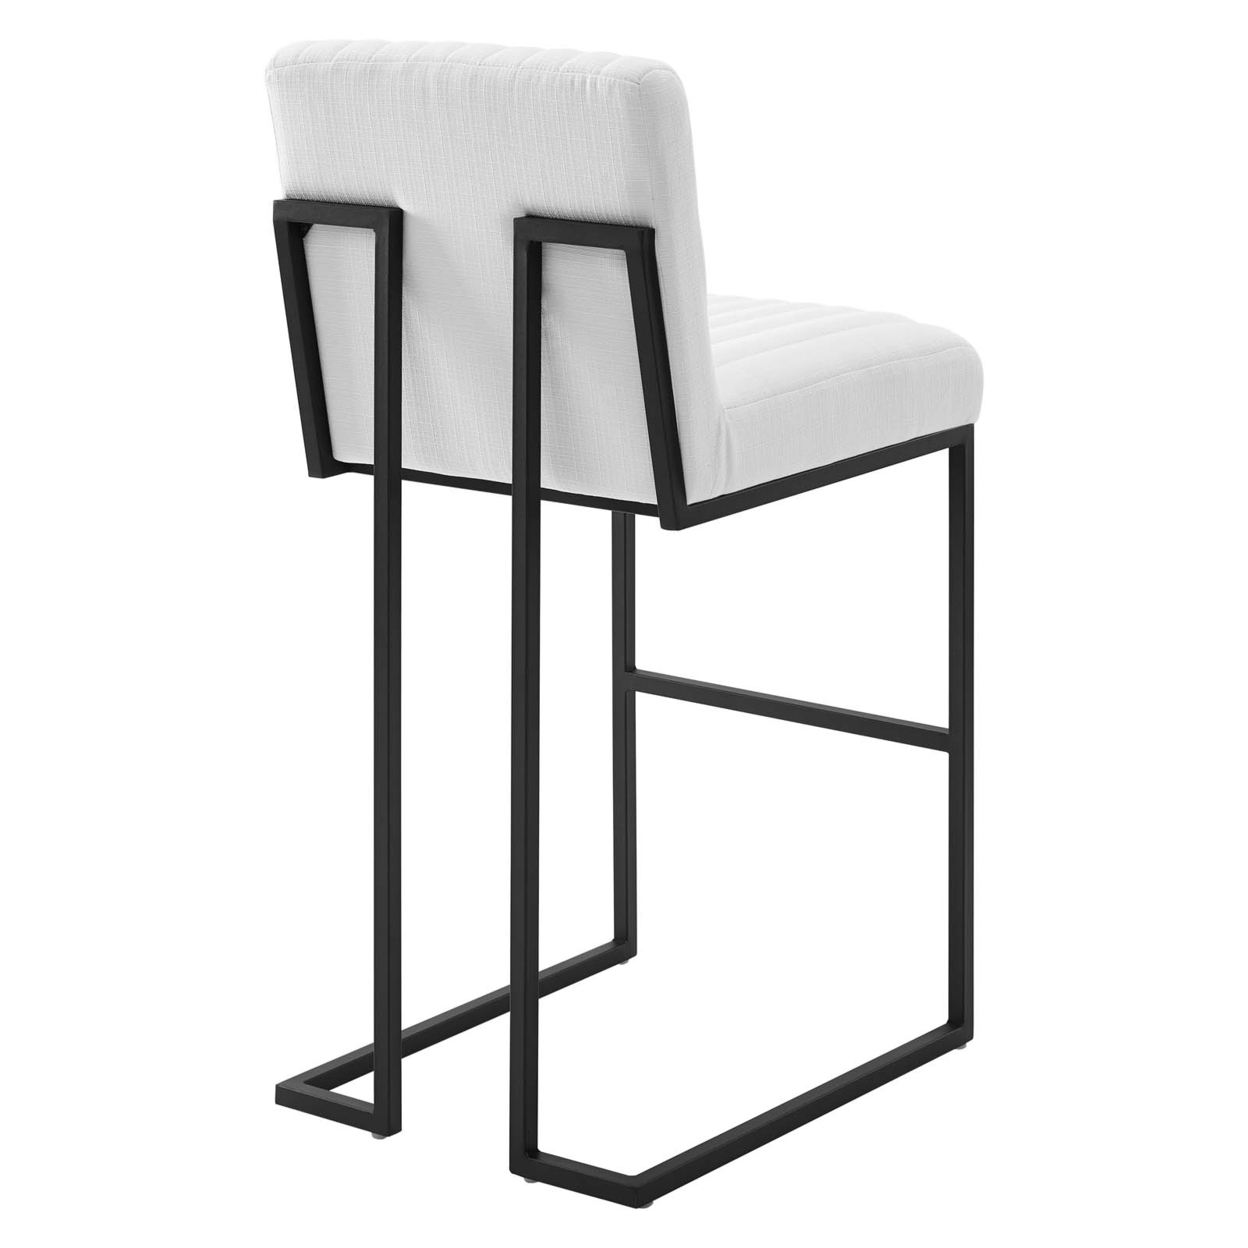 Indulge Channel Tufted Fabric Bar Stool, White